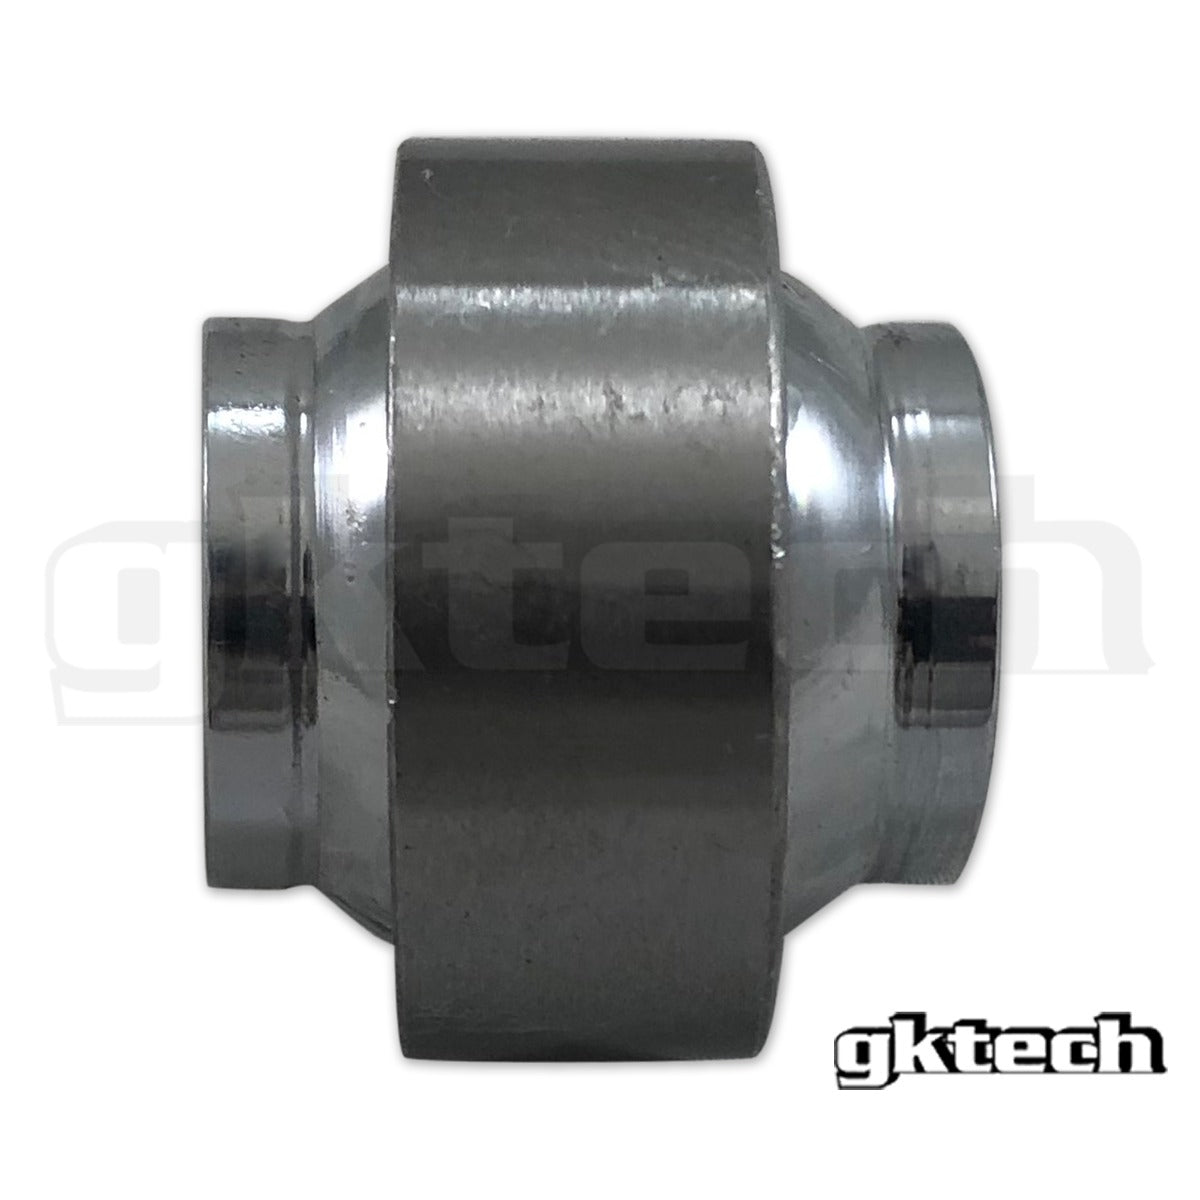 Replacement YPB12T Spherical bearing